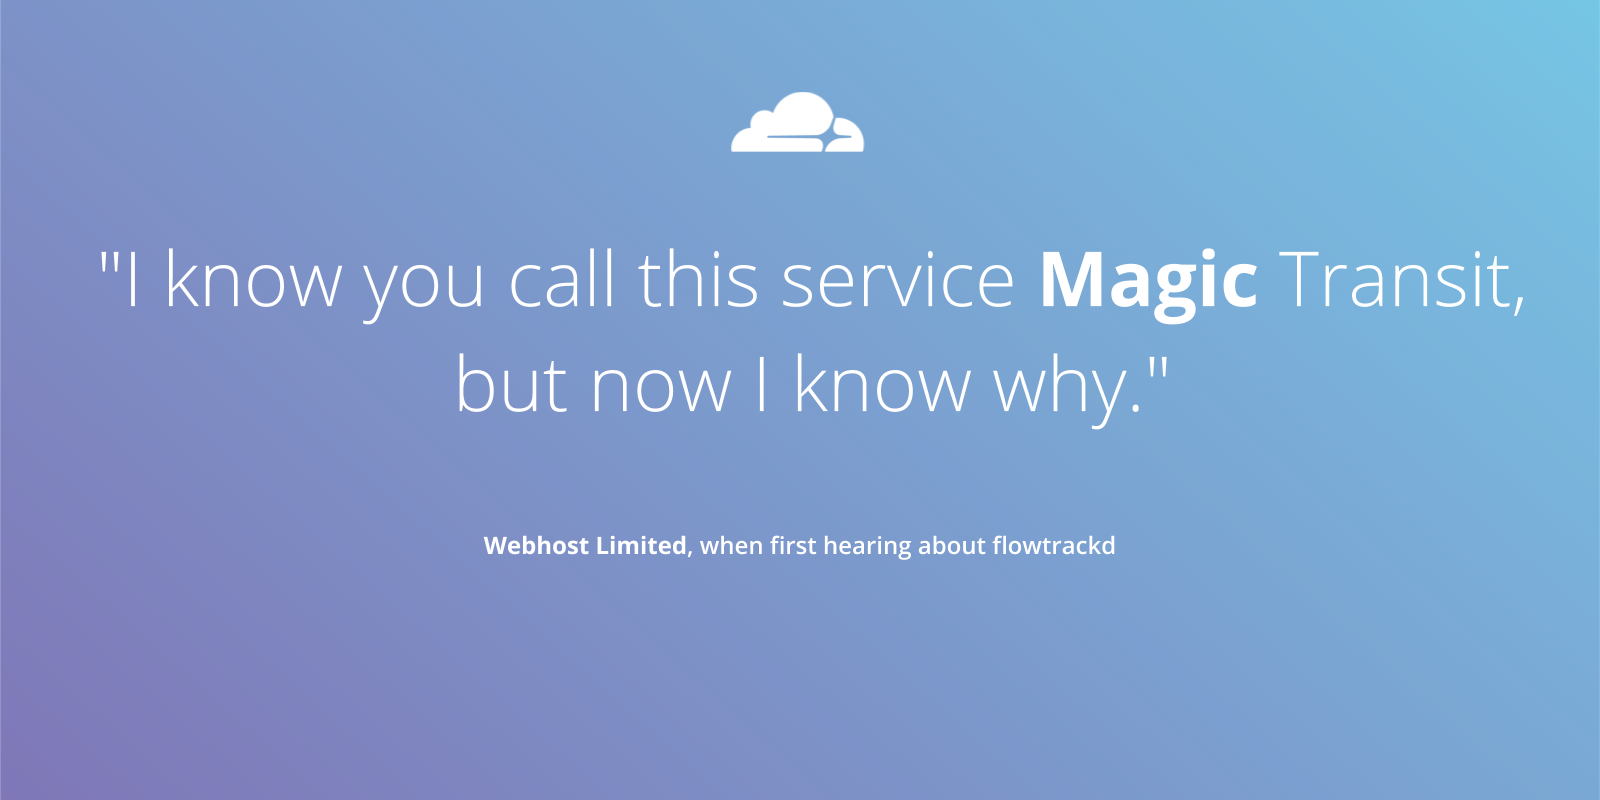 "I know you call this service Magic Transit, but now I know why." - Webhost Limited, when first hearing about flowtrackd